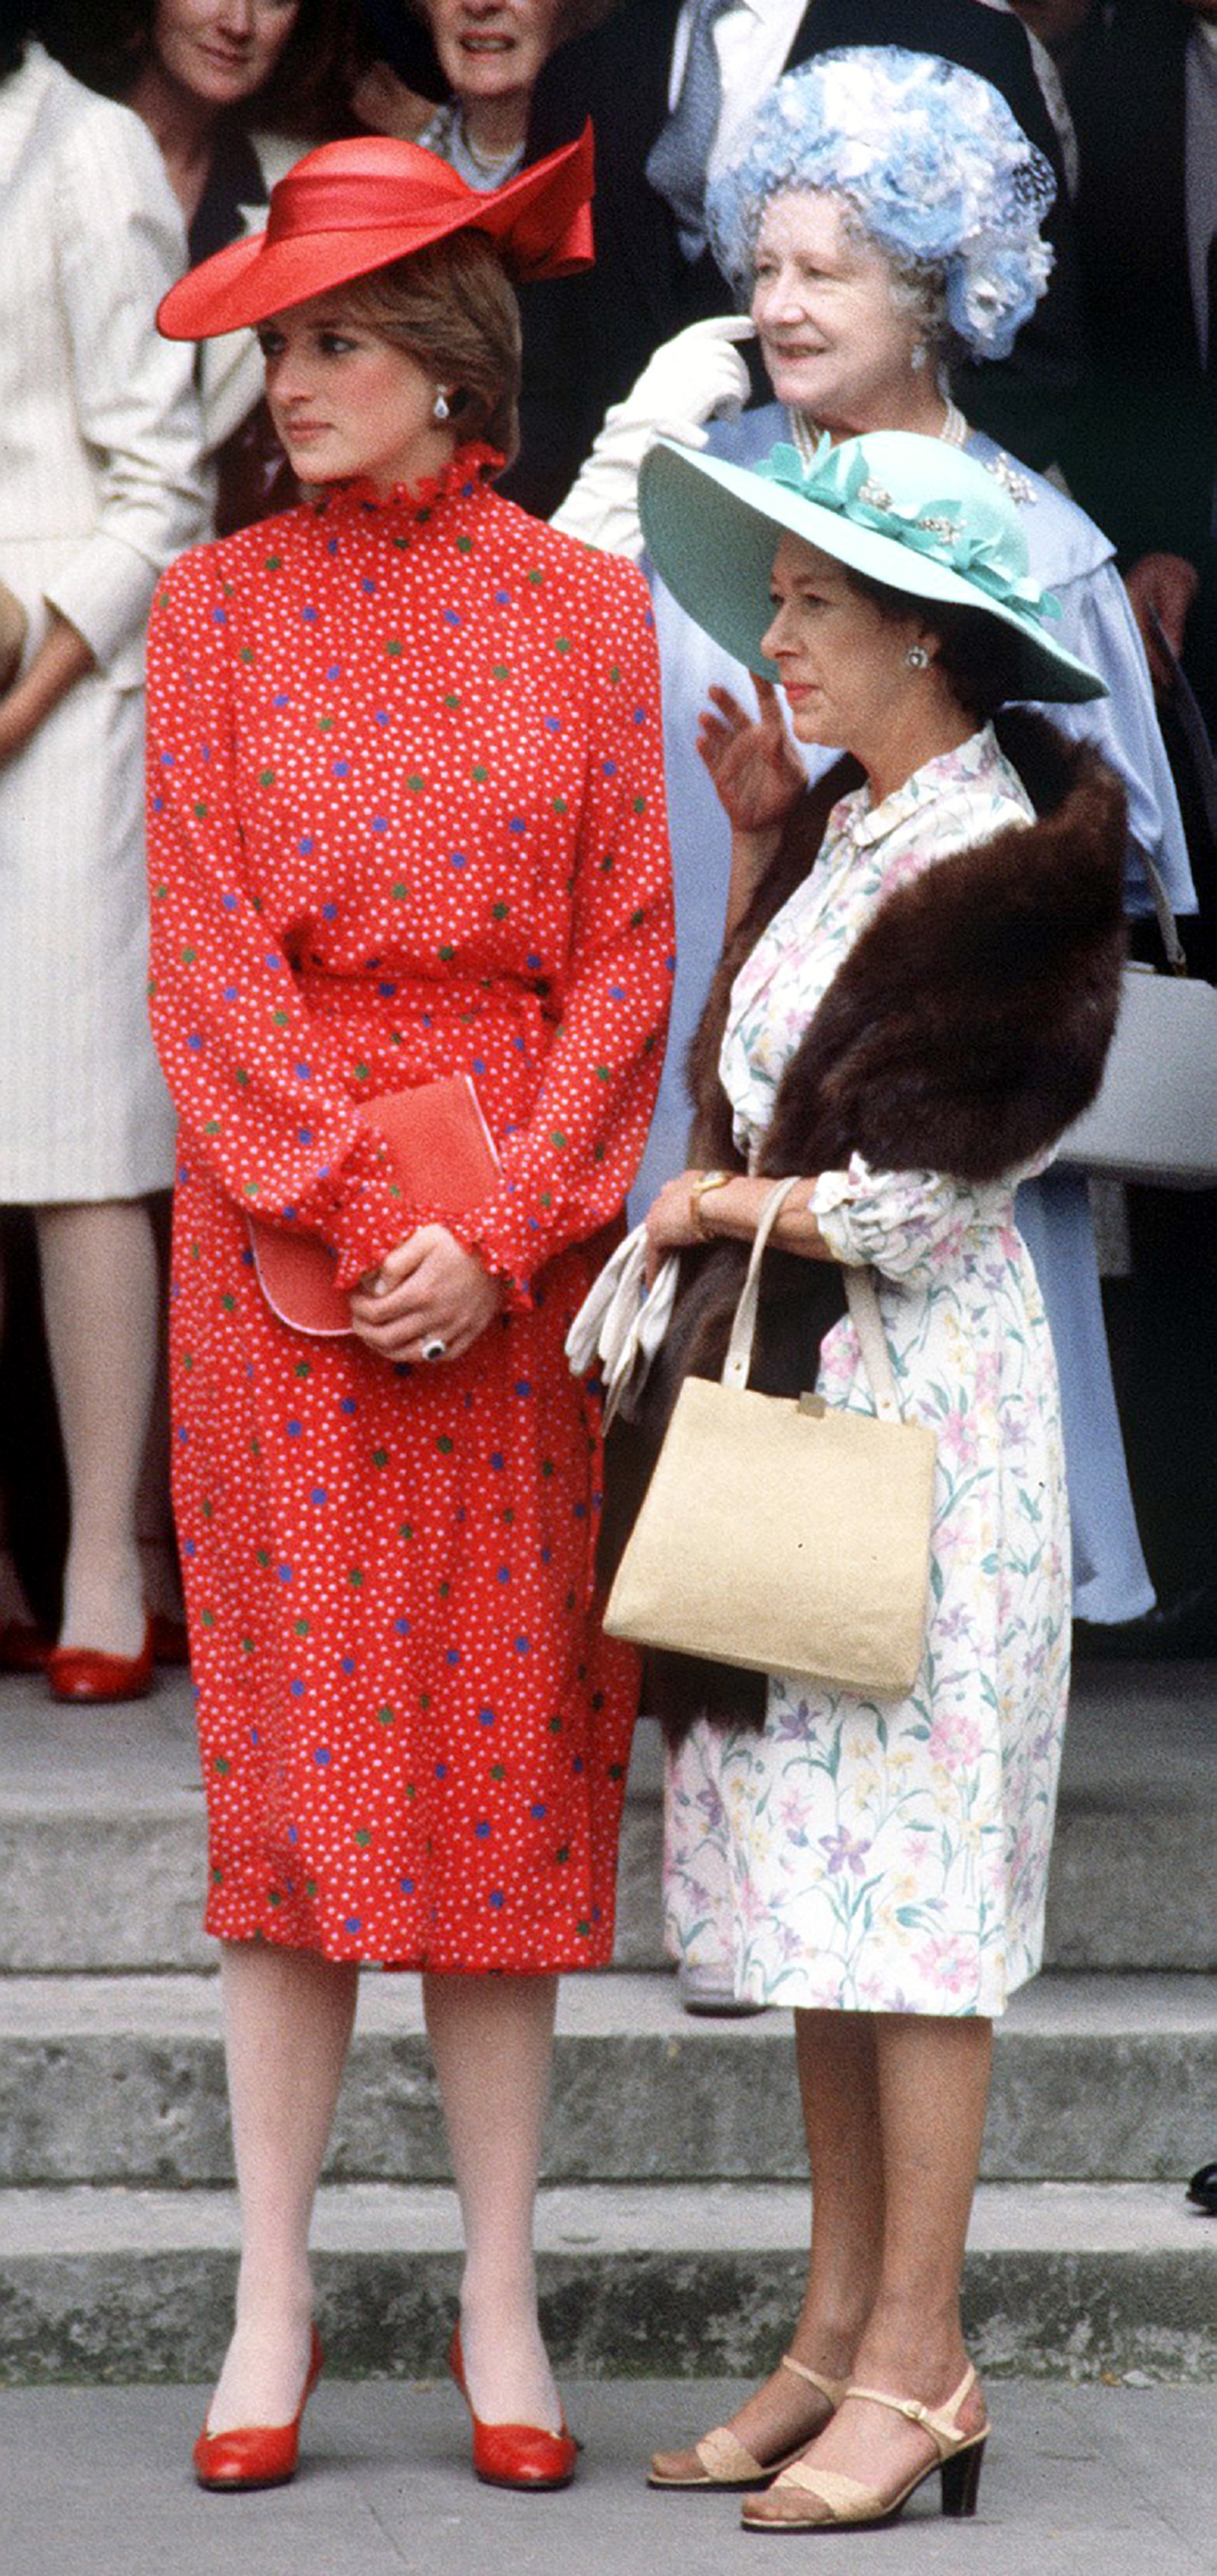 Margaret is pictured with Princess Diana and the Queen Mother in 1981. A year earlier, she had undergone surgery to remove a benign skin lesion